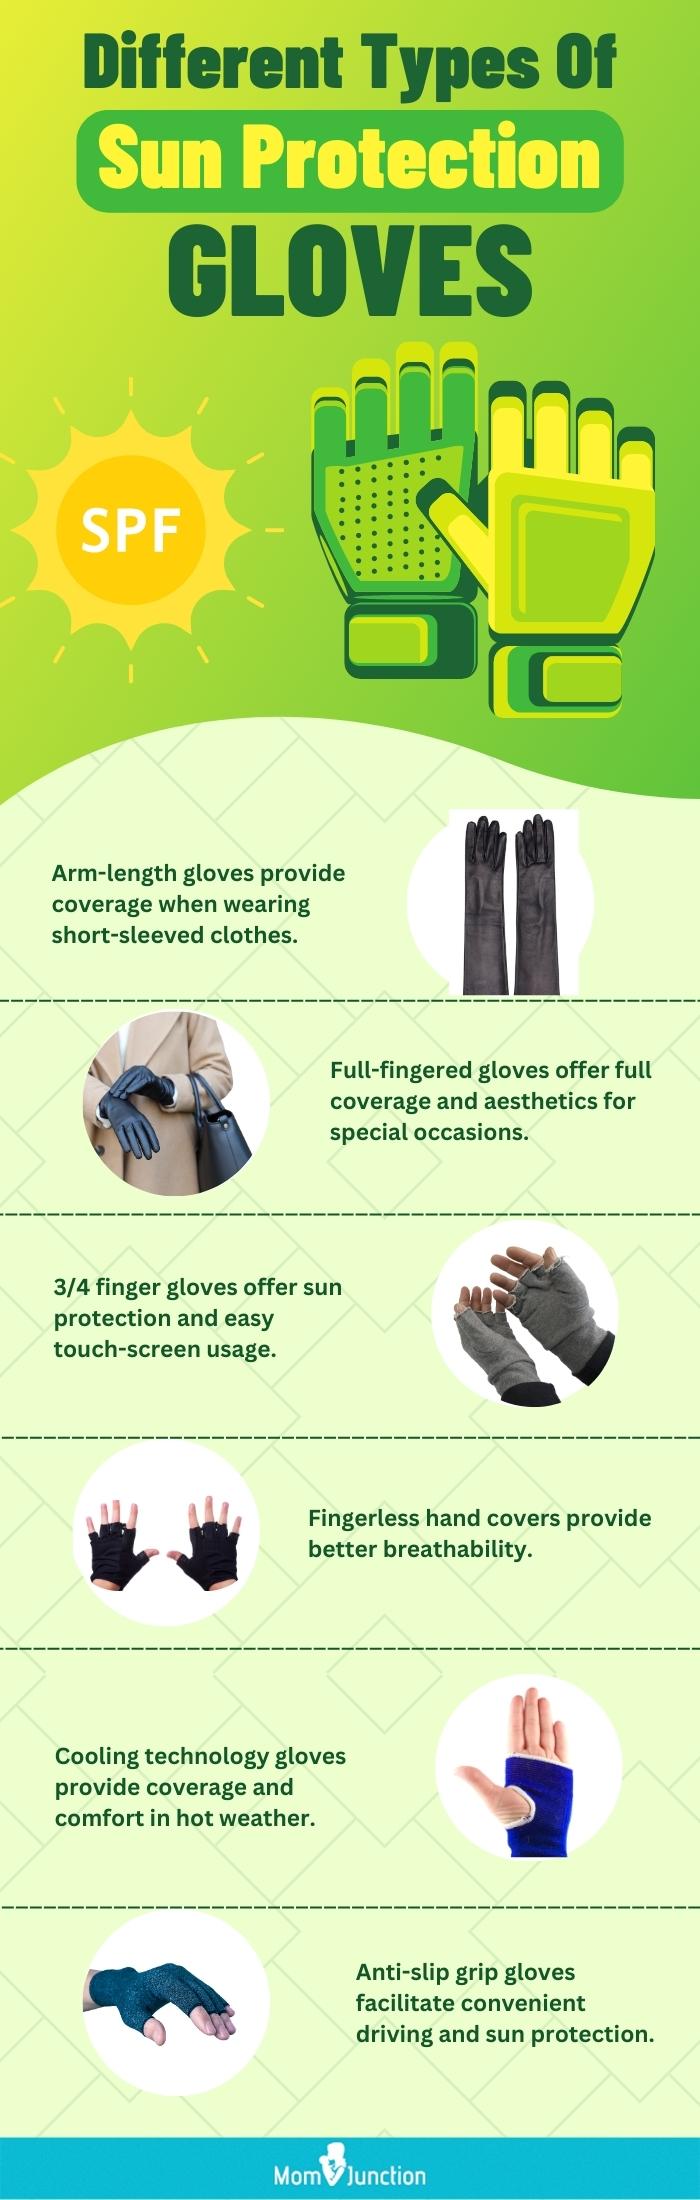 Different Types Of Sun Protection Gloves (infographic)